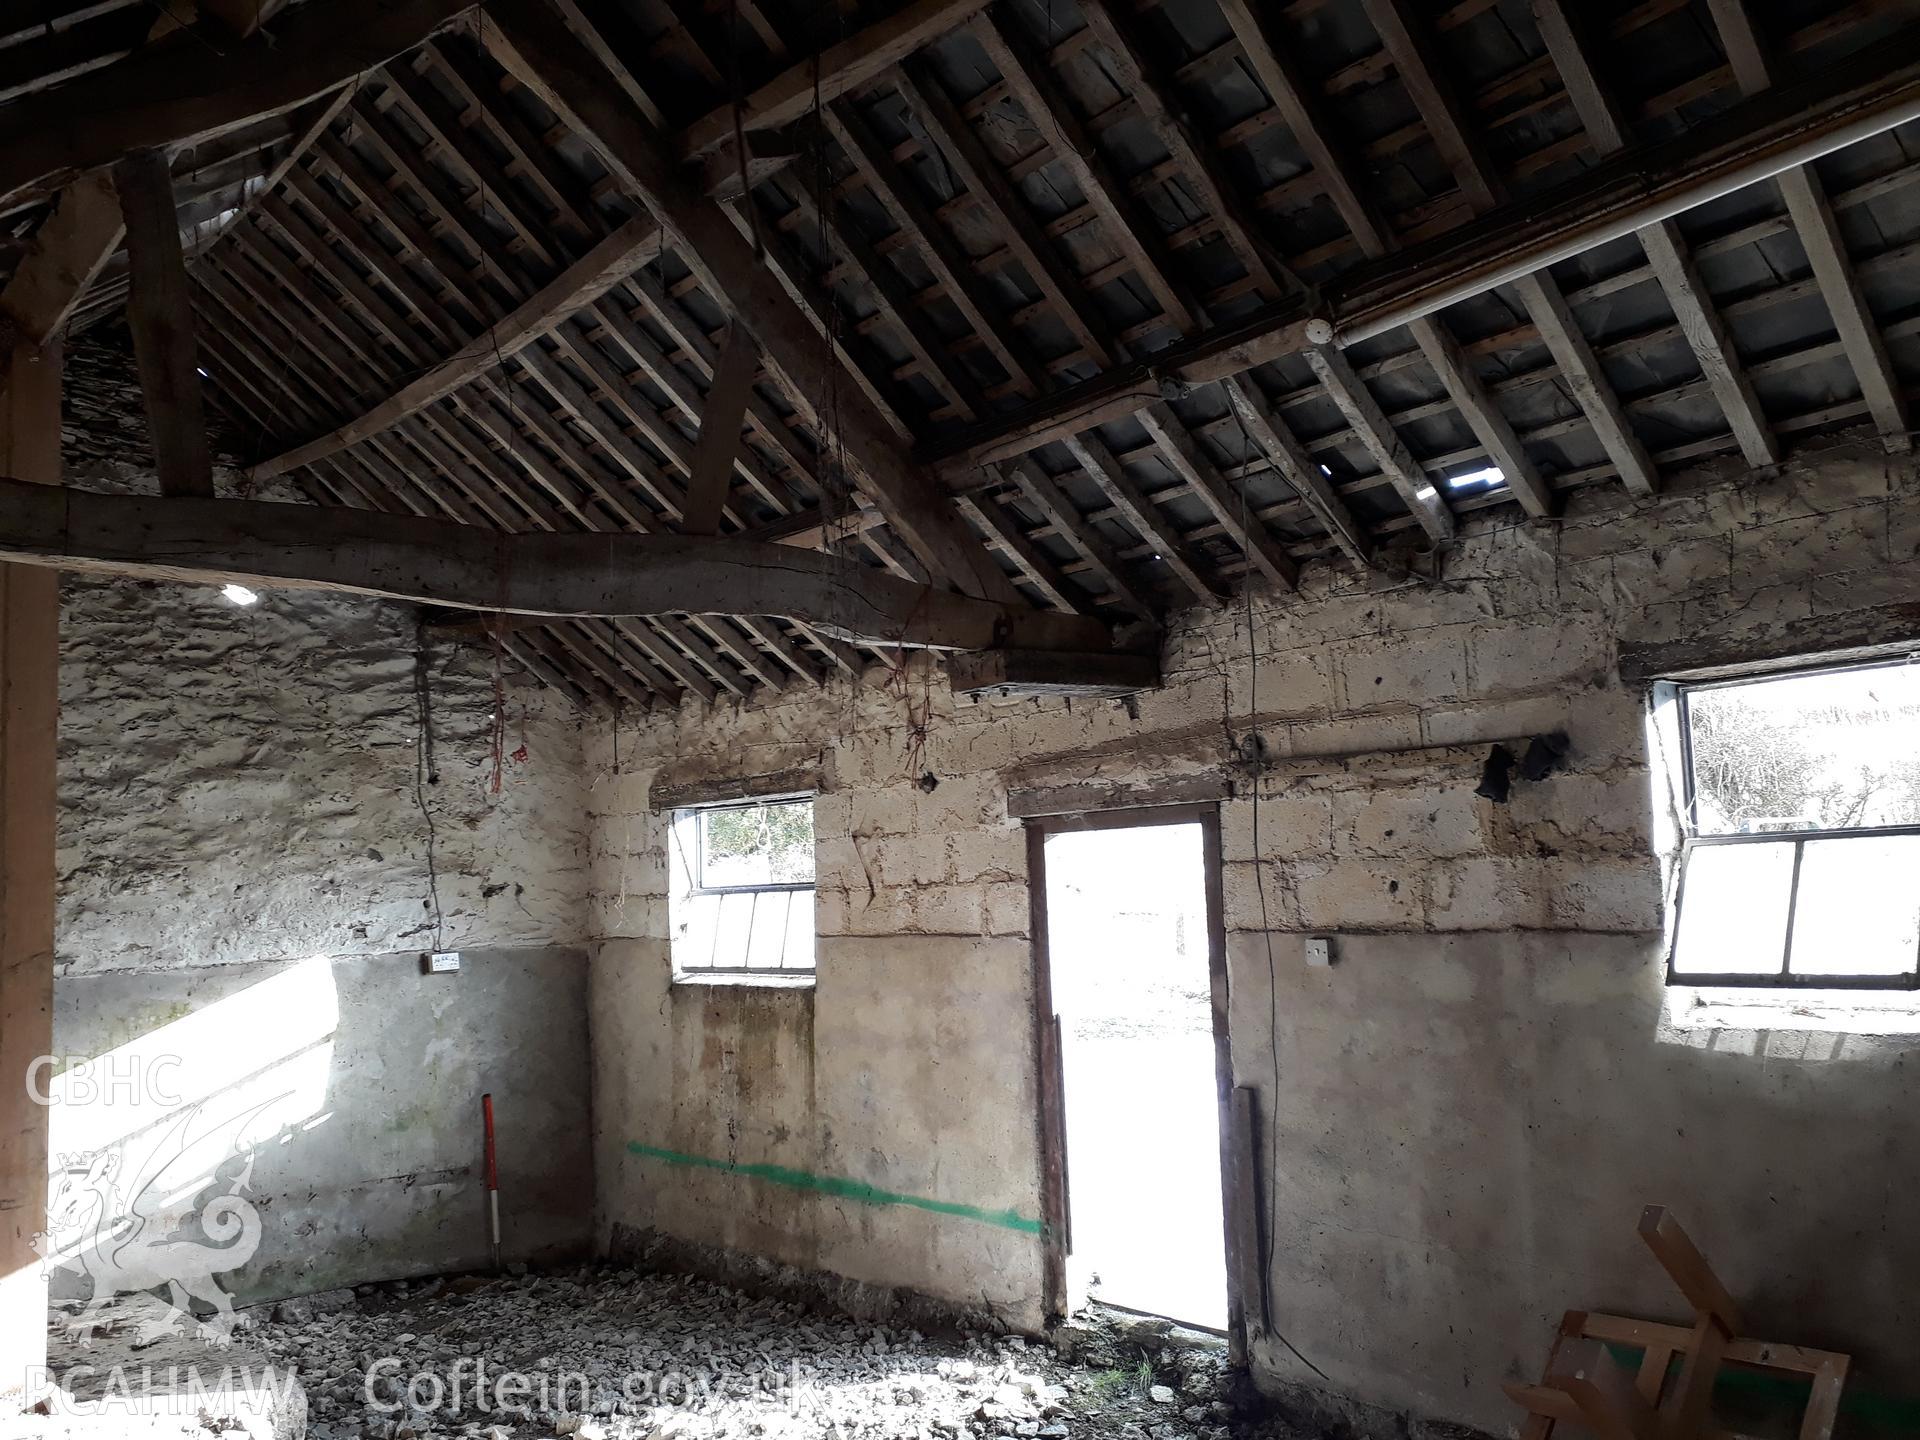 Barn interior with breeze block frontage, view north east. 1m scale. Photographed as part of archaeological building recording conducted at Bryn Ysguboriau, Llanelidan, Denbighshire, carried out by Archaeology Wales, 2018. Project no. P2587.